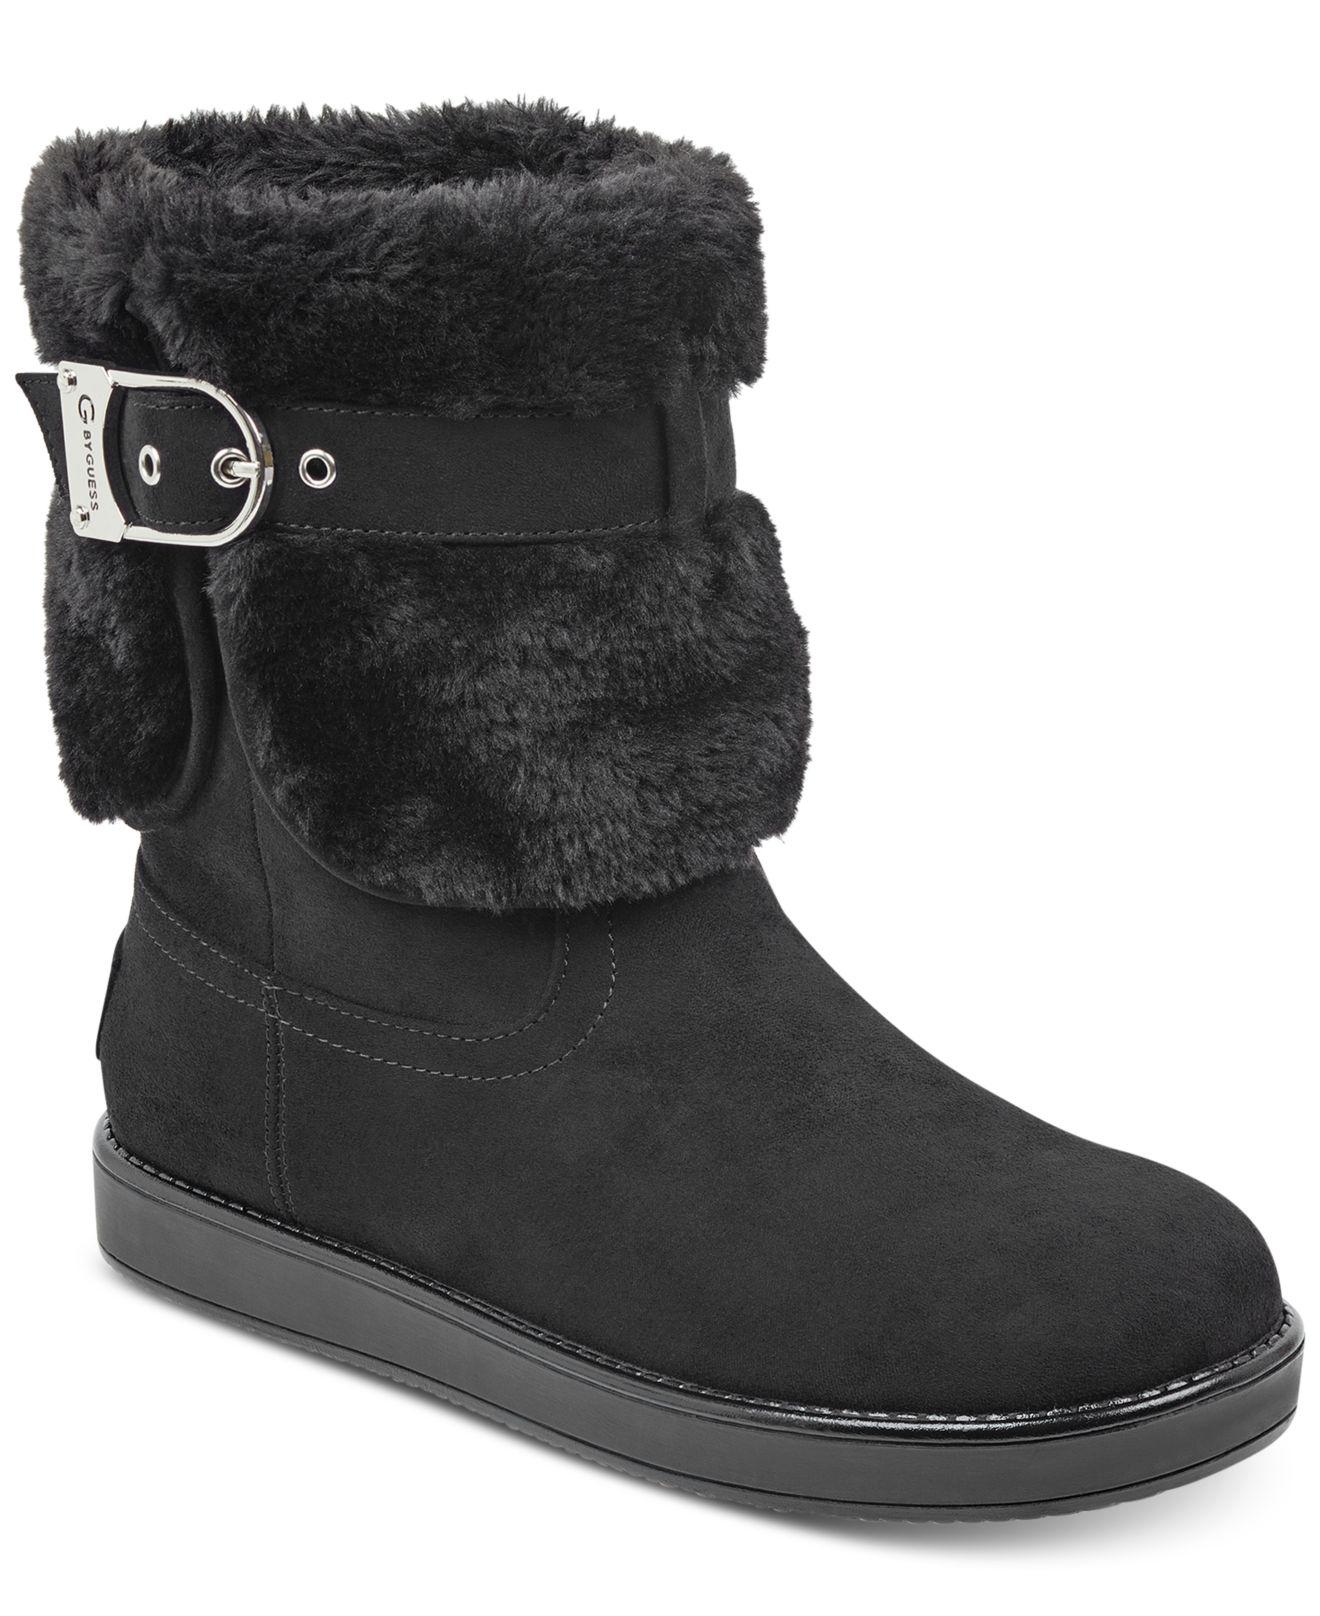 G by Guess Womens Aussie Closed Toe Ankle Cold Weather Boots, Black ...